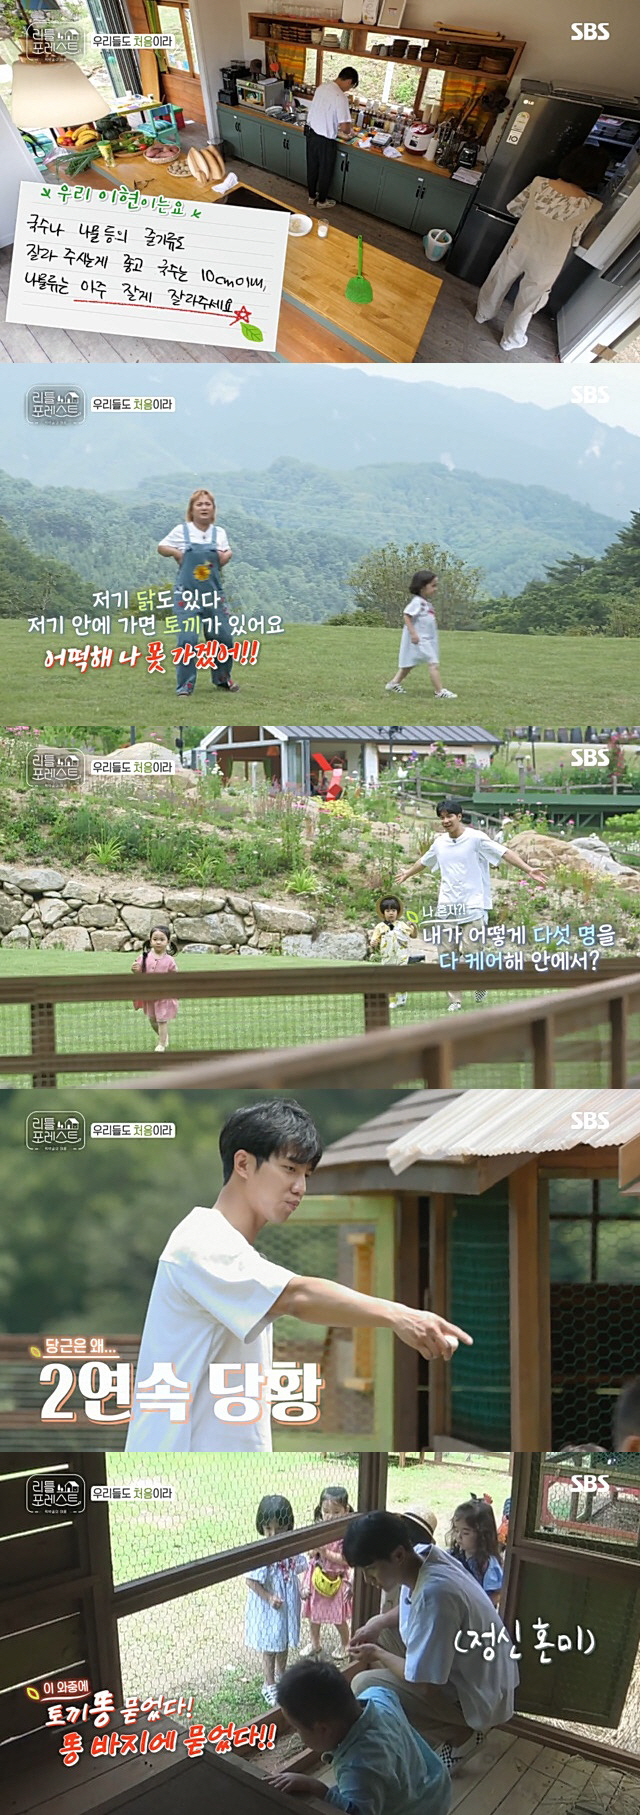 Little Forest Park Na-rae, Lee Seung-gi Gi, Lee Seo Jin and Jung So Min were embarrassed by full-scale real-life childcare.In the SBS entertainment program Little Forest broadcasted on the 13th, the first day of the four carers was drawn. The main chef Lee Seo-jin started lunch for the children.Lee Seo-jin became a dajini by chopping vegetables for children, and showed a delicate appearance of taking children during cooking.While lunch was being prepared, Lee Seung-gi-ki and Park Na-rae took the children to the animal farm, and unlike the excited children, Park Na-rae, who had chicken phobia, was afraid and did not know what to do.Lee Seung-gi-gi said, How do I care for all five people? He worried, but he made it possible for children to touch eggs, show rabbits, and get close to children.Choi dropped the egg, crying, What do I do? And Lee became restless and icy. Also, while Lee was breathing for a while, chickens and rabbits came out.Lee Hyun-yi shot a long wind to a rabbit and Lee Han-yi said that he wanted to eat milk. When the situation continued, Park said, I am sorry I can not help.On the other hand, Jung So-min, who helped Lee Seo-jin to cook, showed no confidence in cooking unlike the aspect of parenting.Lee Seo-jin pointed out, You are just ignorant. Jung So-min, who was trying to make egg soup, made egg steamed.Lee Seo-jin looked at the farm where the children were playing and handed out the sunblock to the children by looking for Park Na-rae with a loudspeaker.While Park went a long way to the hostel, Little Lee had an accident that he was spilling chickens on the rabbit.Lee Seung-gi-gi found a broomstick and a dustpan, and Park Na-rae went up and down again and breathed out a breath. Lee Seung-gi-gi applied a sunblock to Littles, but it was unintentionally made up eggs.The white kids faces eventually became Park Na-rae, and they applied a block to them. They struggled to clean up the animal farm.Lee Seo-jin decided to make an omraise for children, but Lee Han-yi said, I hate omraise.Park said, It may be different from the omelet that I have eaten so far. If Lee Han eats it and does not taste it, lets not eat it.Lee Seo-jin showed a whirlwind omerice that he practiced for a month, and Lee Seo-jins handmade ketchup caught the childrens appetite in the whirlwind omerice that he completed at once.Lee Seo-jin smiled at the childrens delicious eating, and Lee Seung-gi-gi and Jung So-min, who were hungry while feeding Littles rice, ate the food that the children dropped.Kang Yi-han, who ate three milk before eating rice, said, I am full. I did not eat much rice and spilled soup on my clothes.Lee Seung-gi-gi changed his clothes and solved the bathroom and spent an unpredictable lunch time.When the Littles finished their meals, the adults ate the leftovers. Lee Seung-gi-gi took turns sitting at the table with Park Na-rae, who had eaten in a hurry.Meanwhile, Brooke and Grace wanted Chikachika, and Lee Seo-jin, who had a forced meal, took the twins and brushed them directly at eye level.Jung So-min said, I do not know where the rice is going. Lee Seung-gi-gi said, I thought about playing, but I did not think about feeding and wiping.Care is a real different thing - play is short and care is long, he said.Meanwhile, the children fell into a bead toy in one room, and unlike Little, who was in the best condition in the endless repetition of beads, adults were rapidly exhausted.